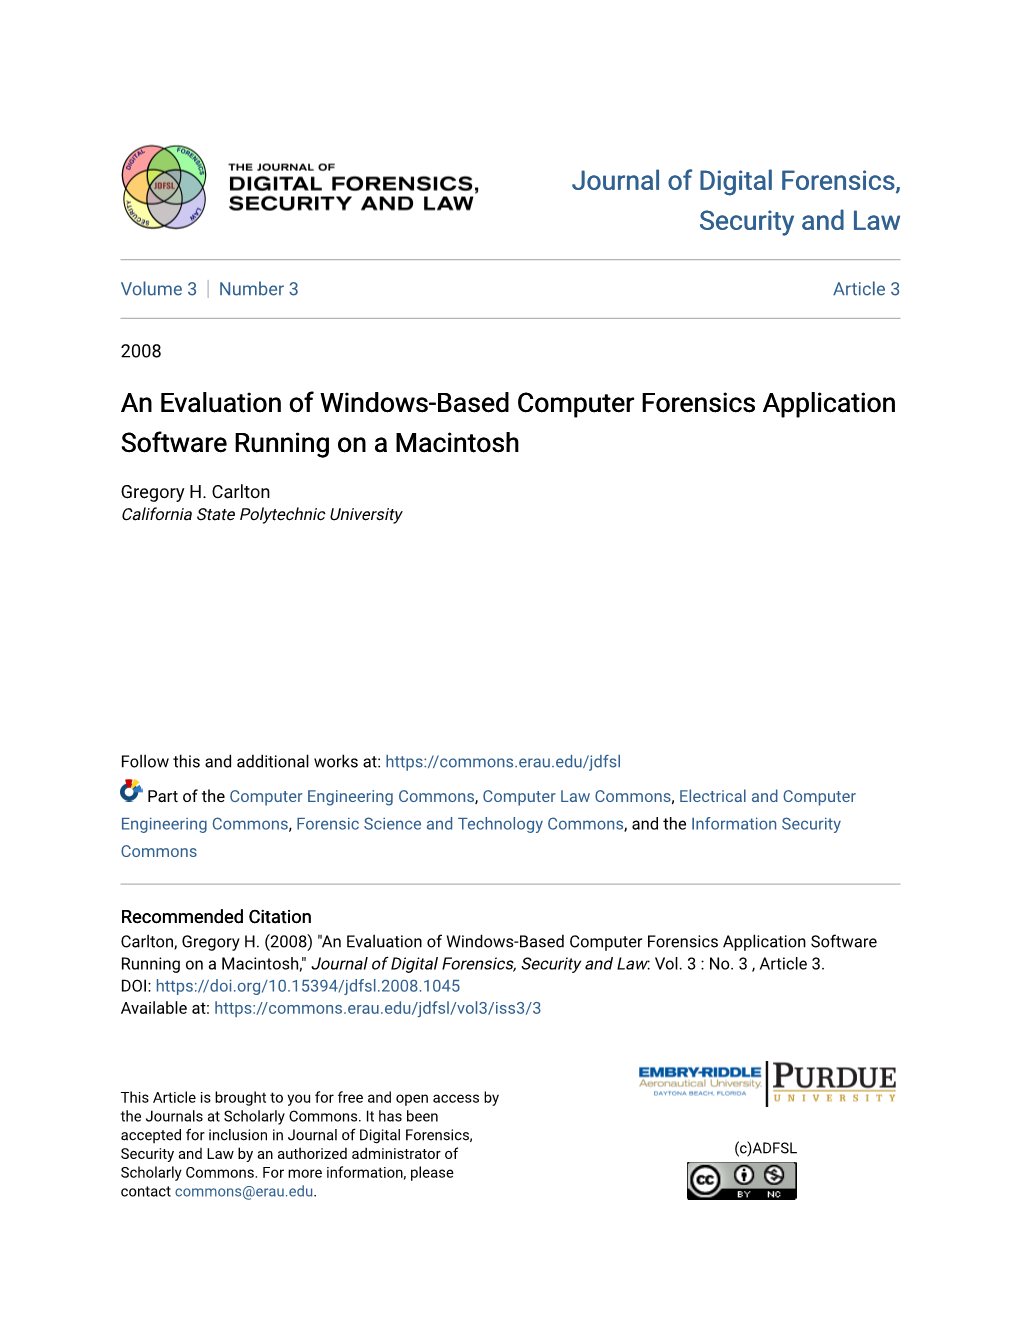 An Evaluation of Windows-Based Computer Forensics Application Software Running on a Macintosh